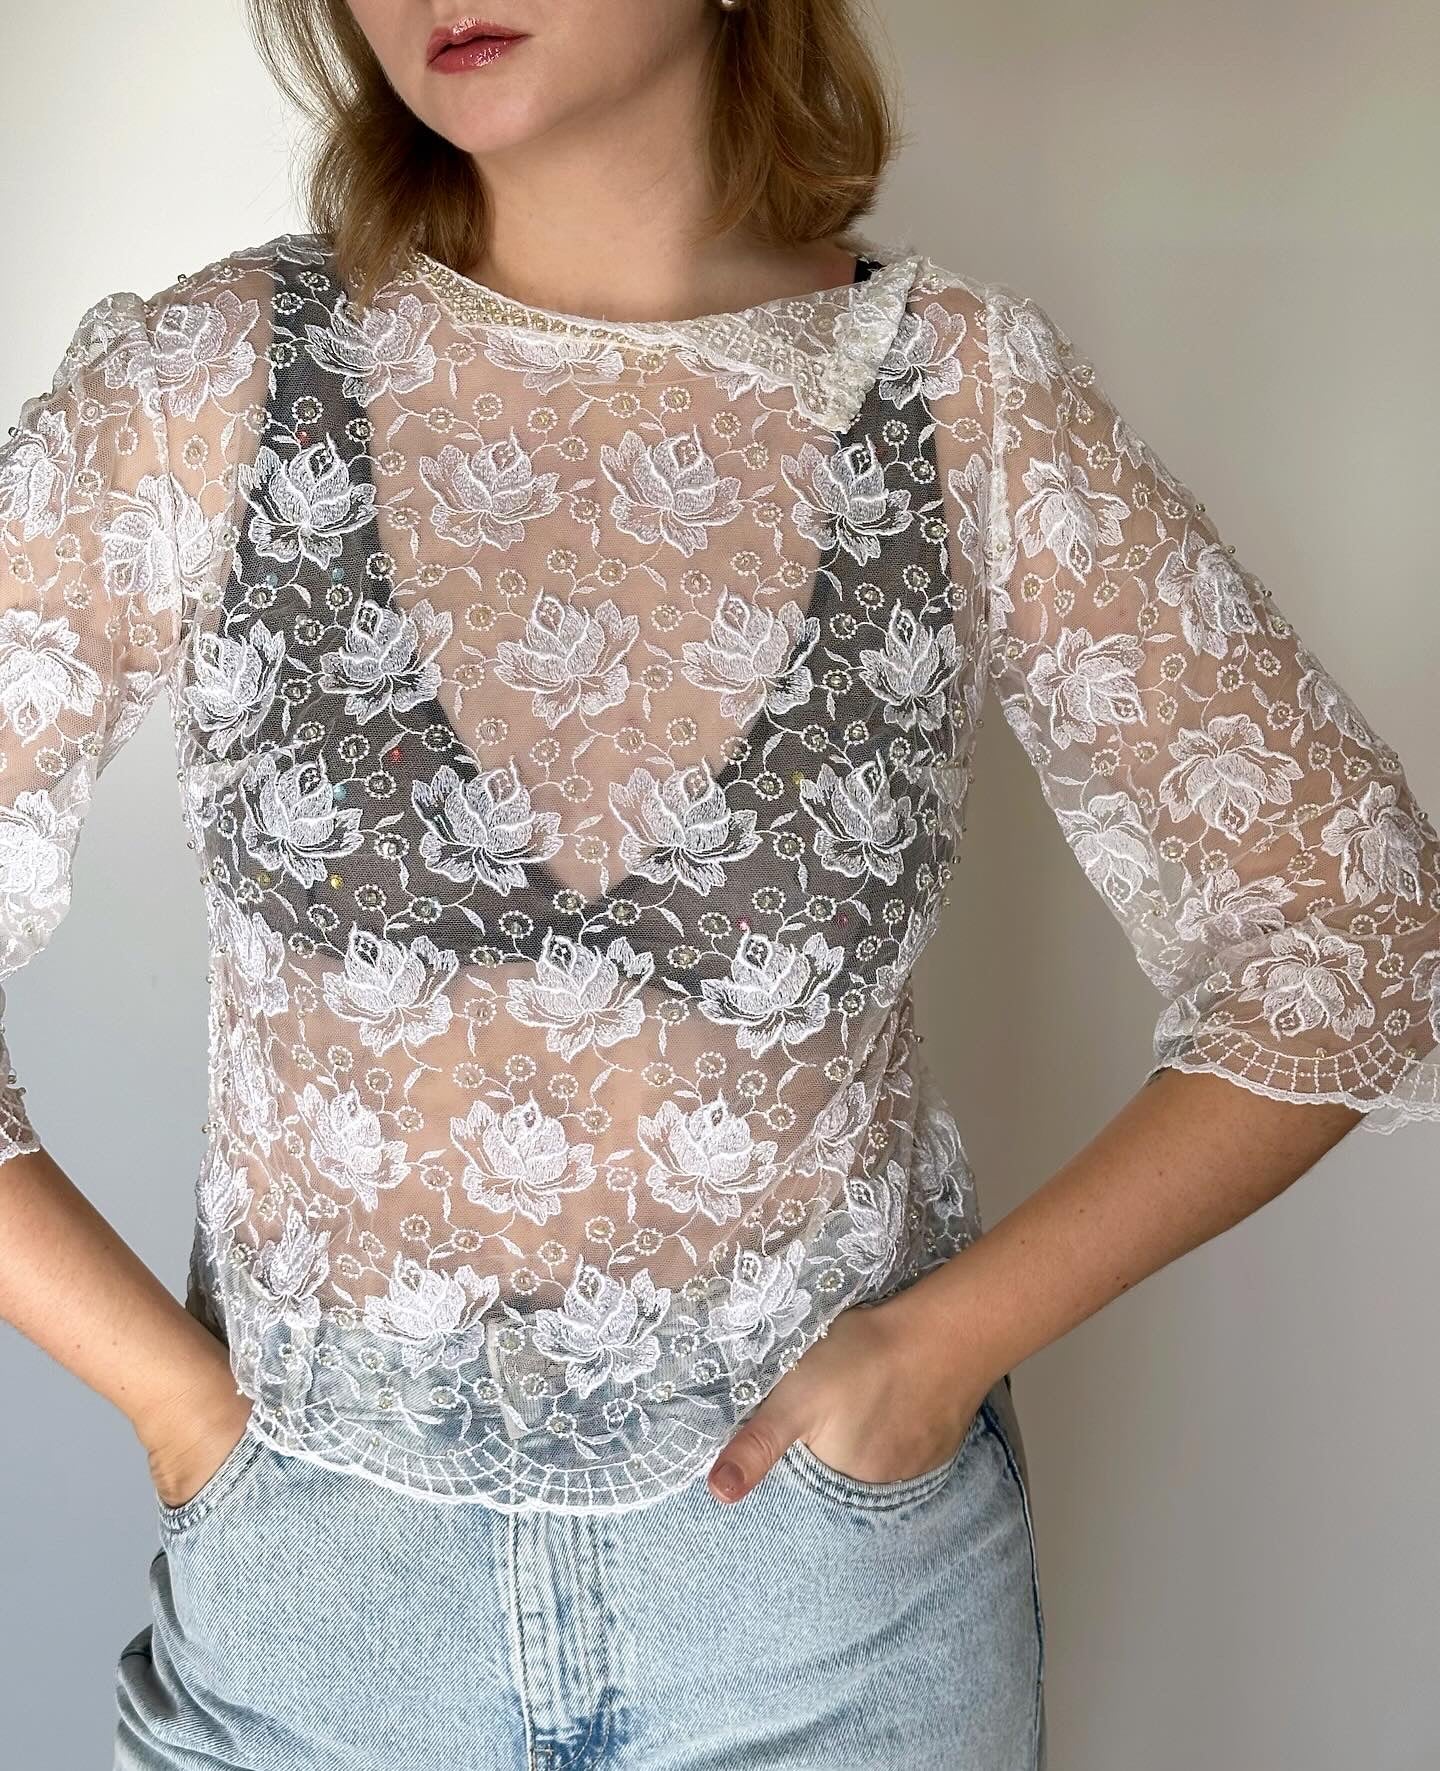 Beautiful vintage lace blouse with flowers and beads